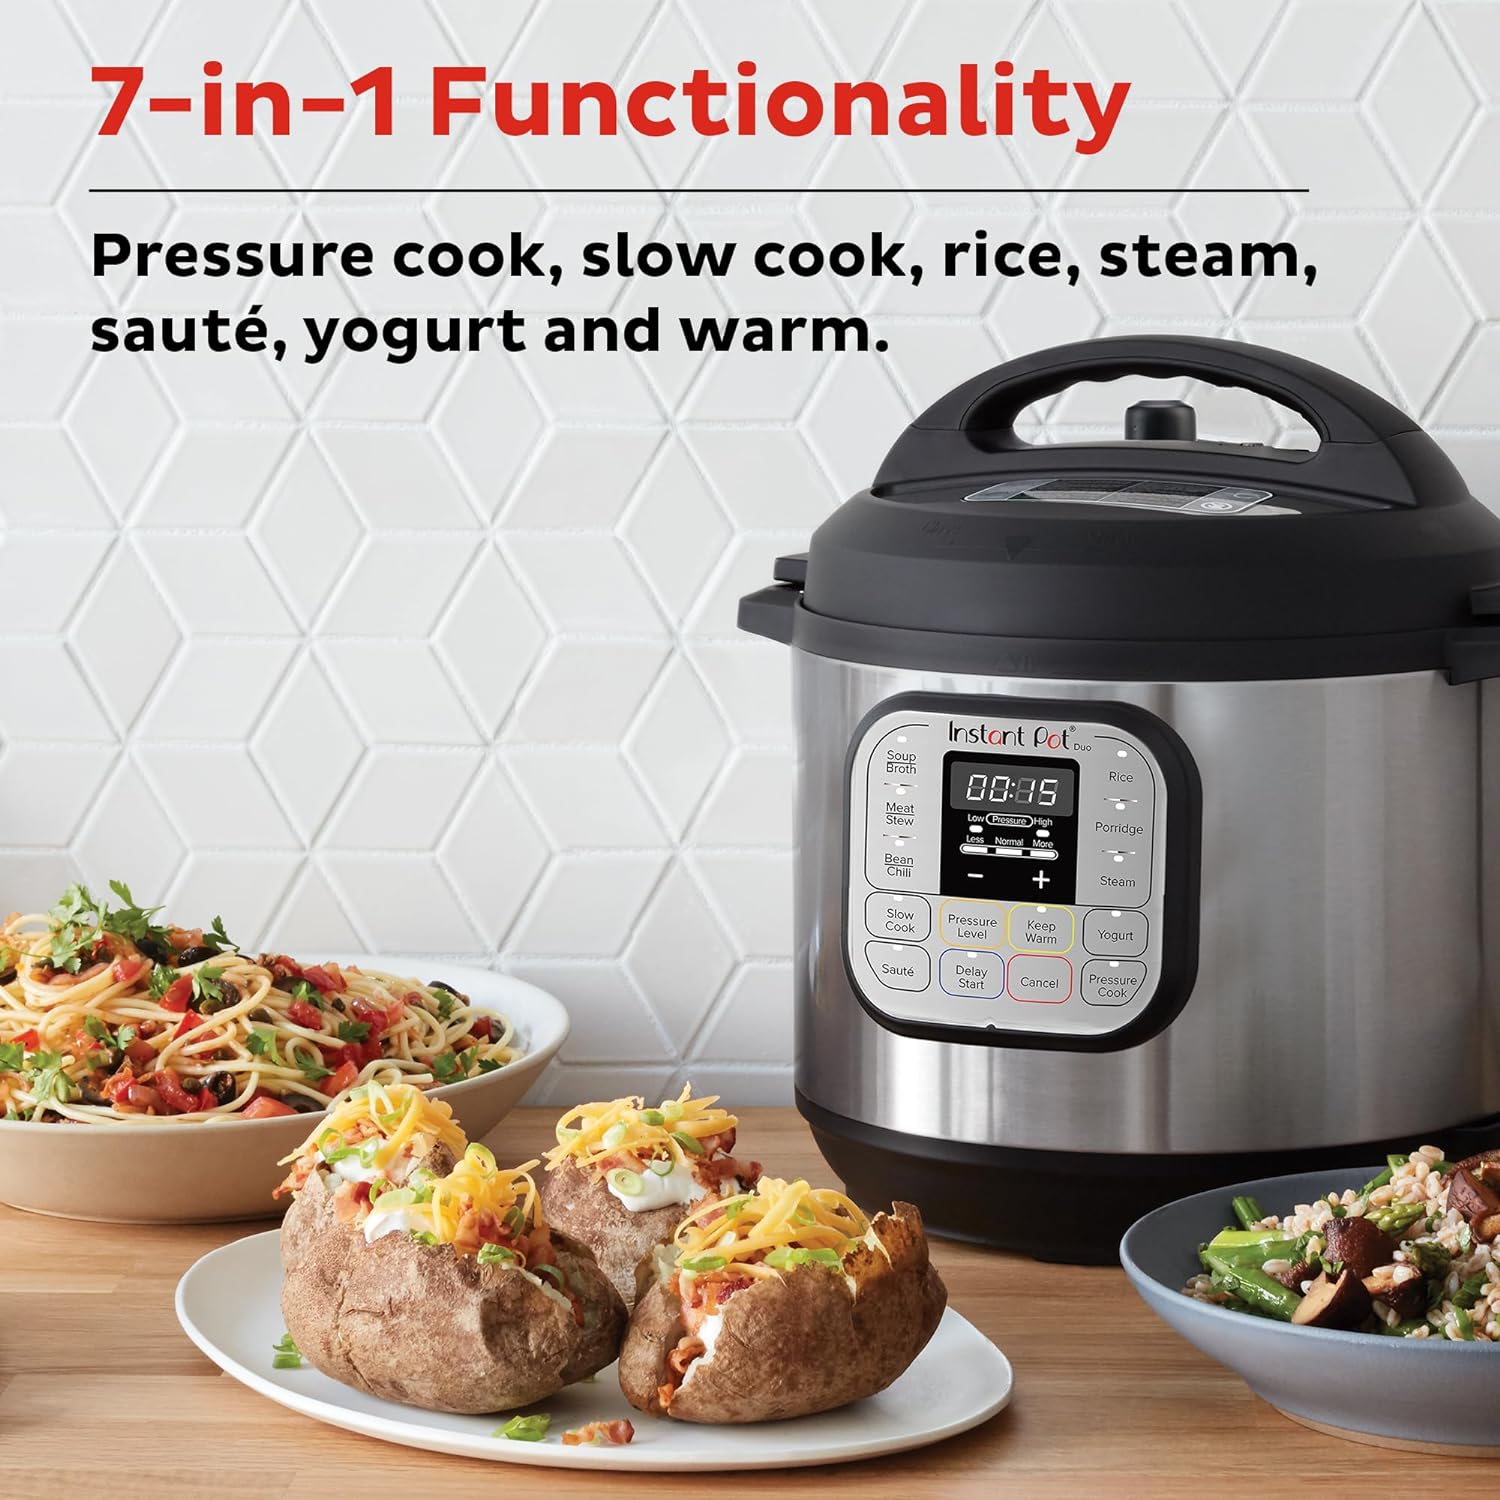 Instant Pot Duo 7-in-1 Electric Pressure Cooker, Slow Cooker, Rice Cooker, Steamer, Sauté, Yogurt Maker, Warmer & Sterilizer, Includes Free App with over 1900 Recipes, Stainless Steel, 3 Quart - image 3 of 9